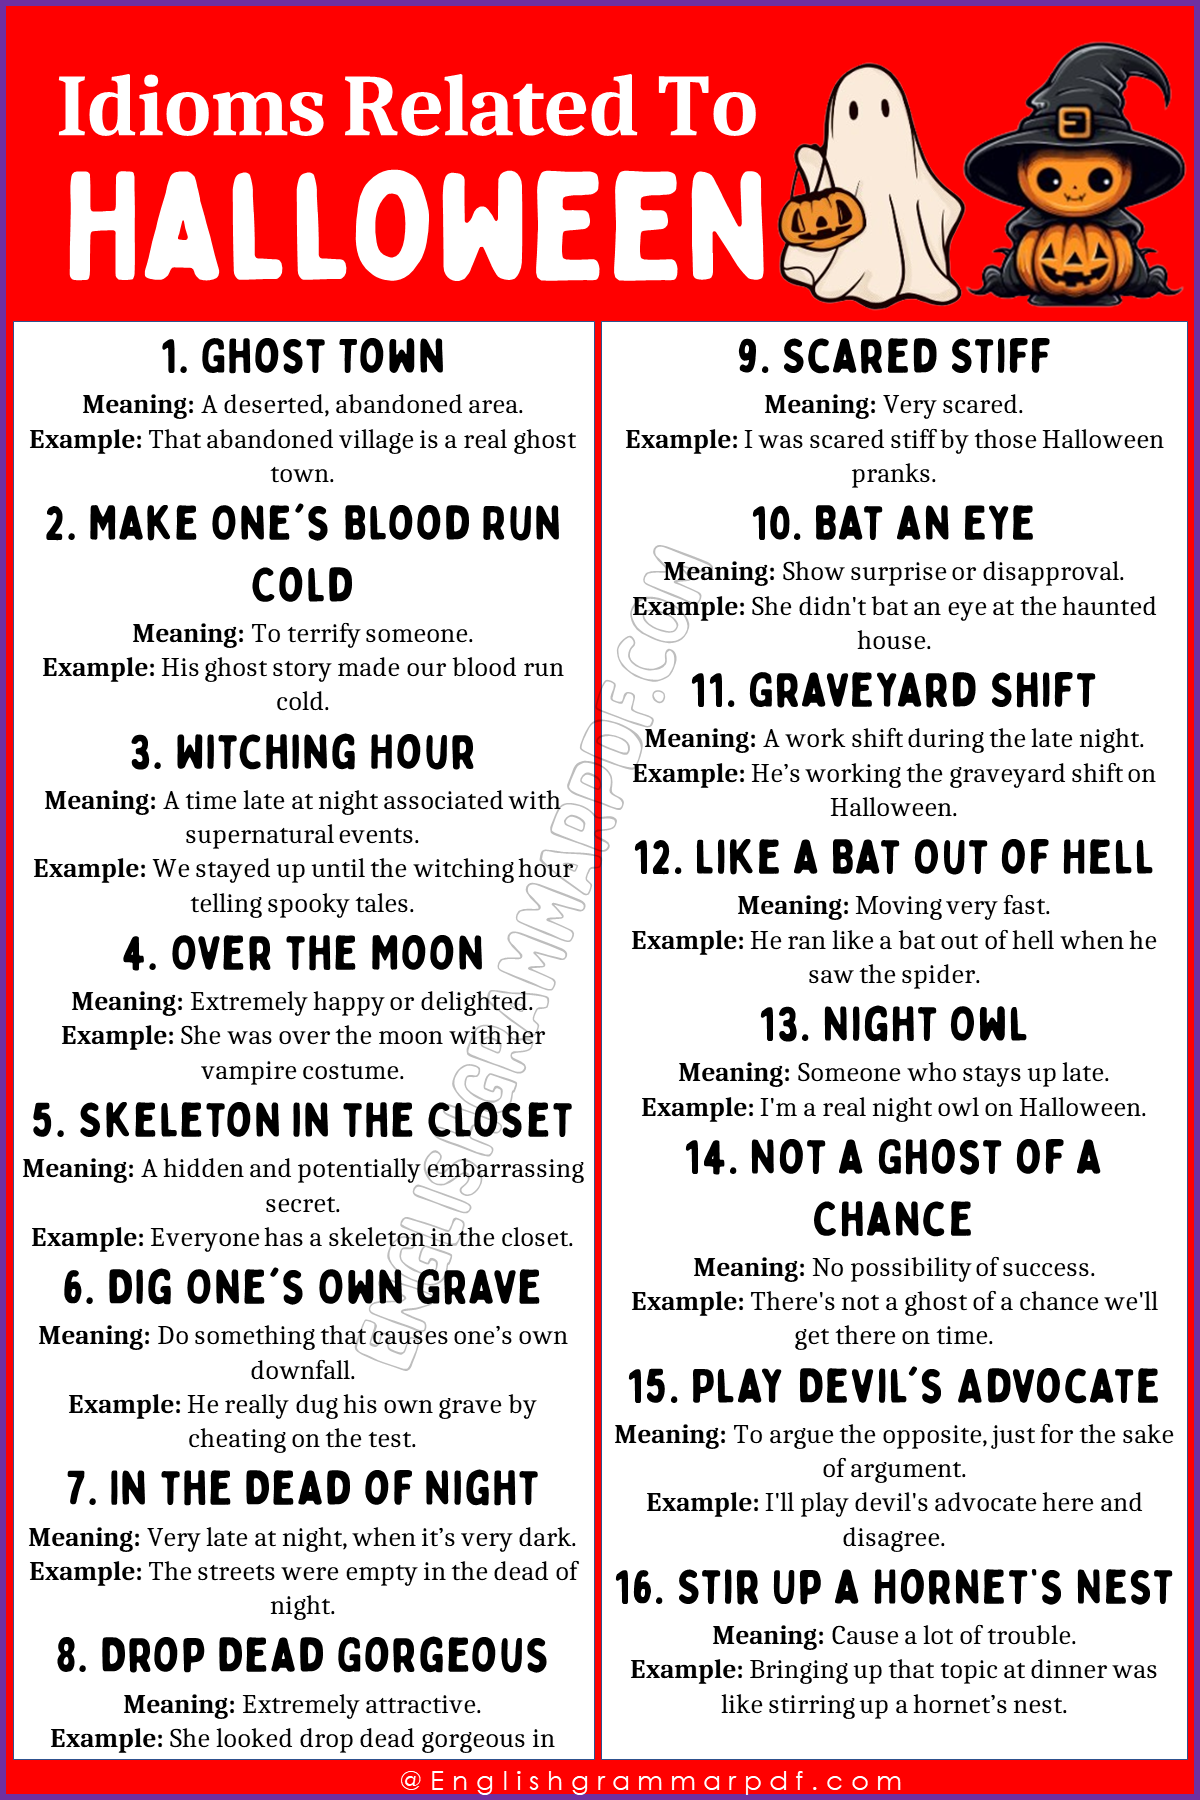 Idioms Related to Halloween